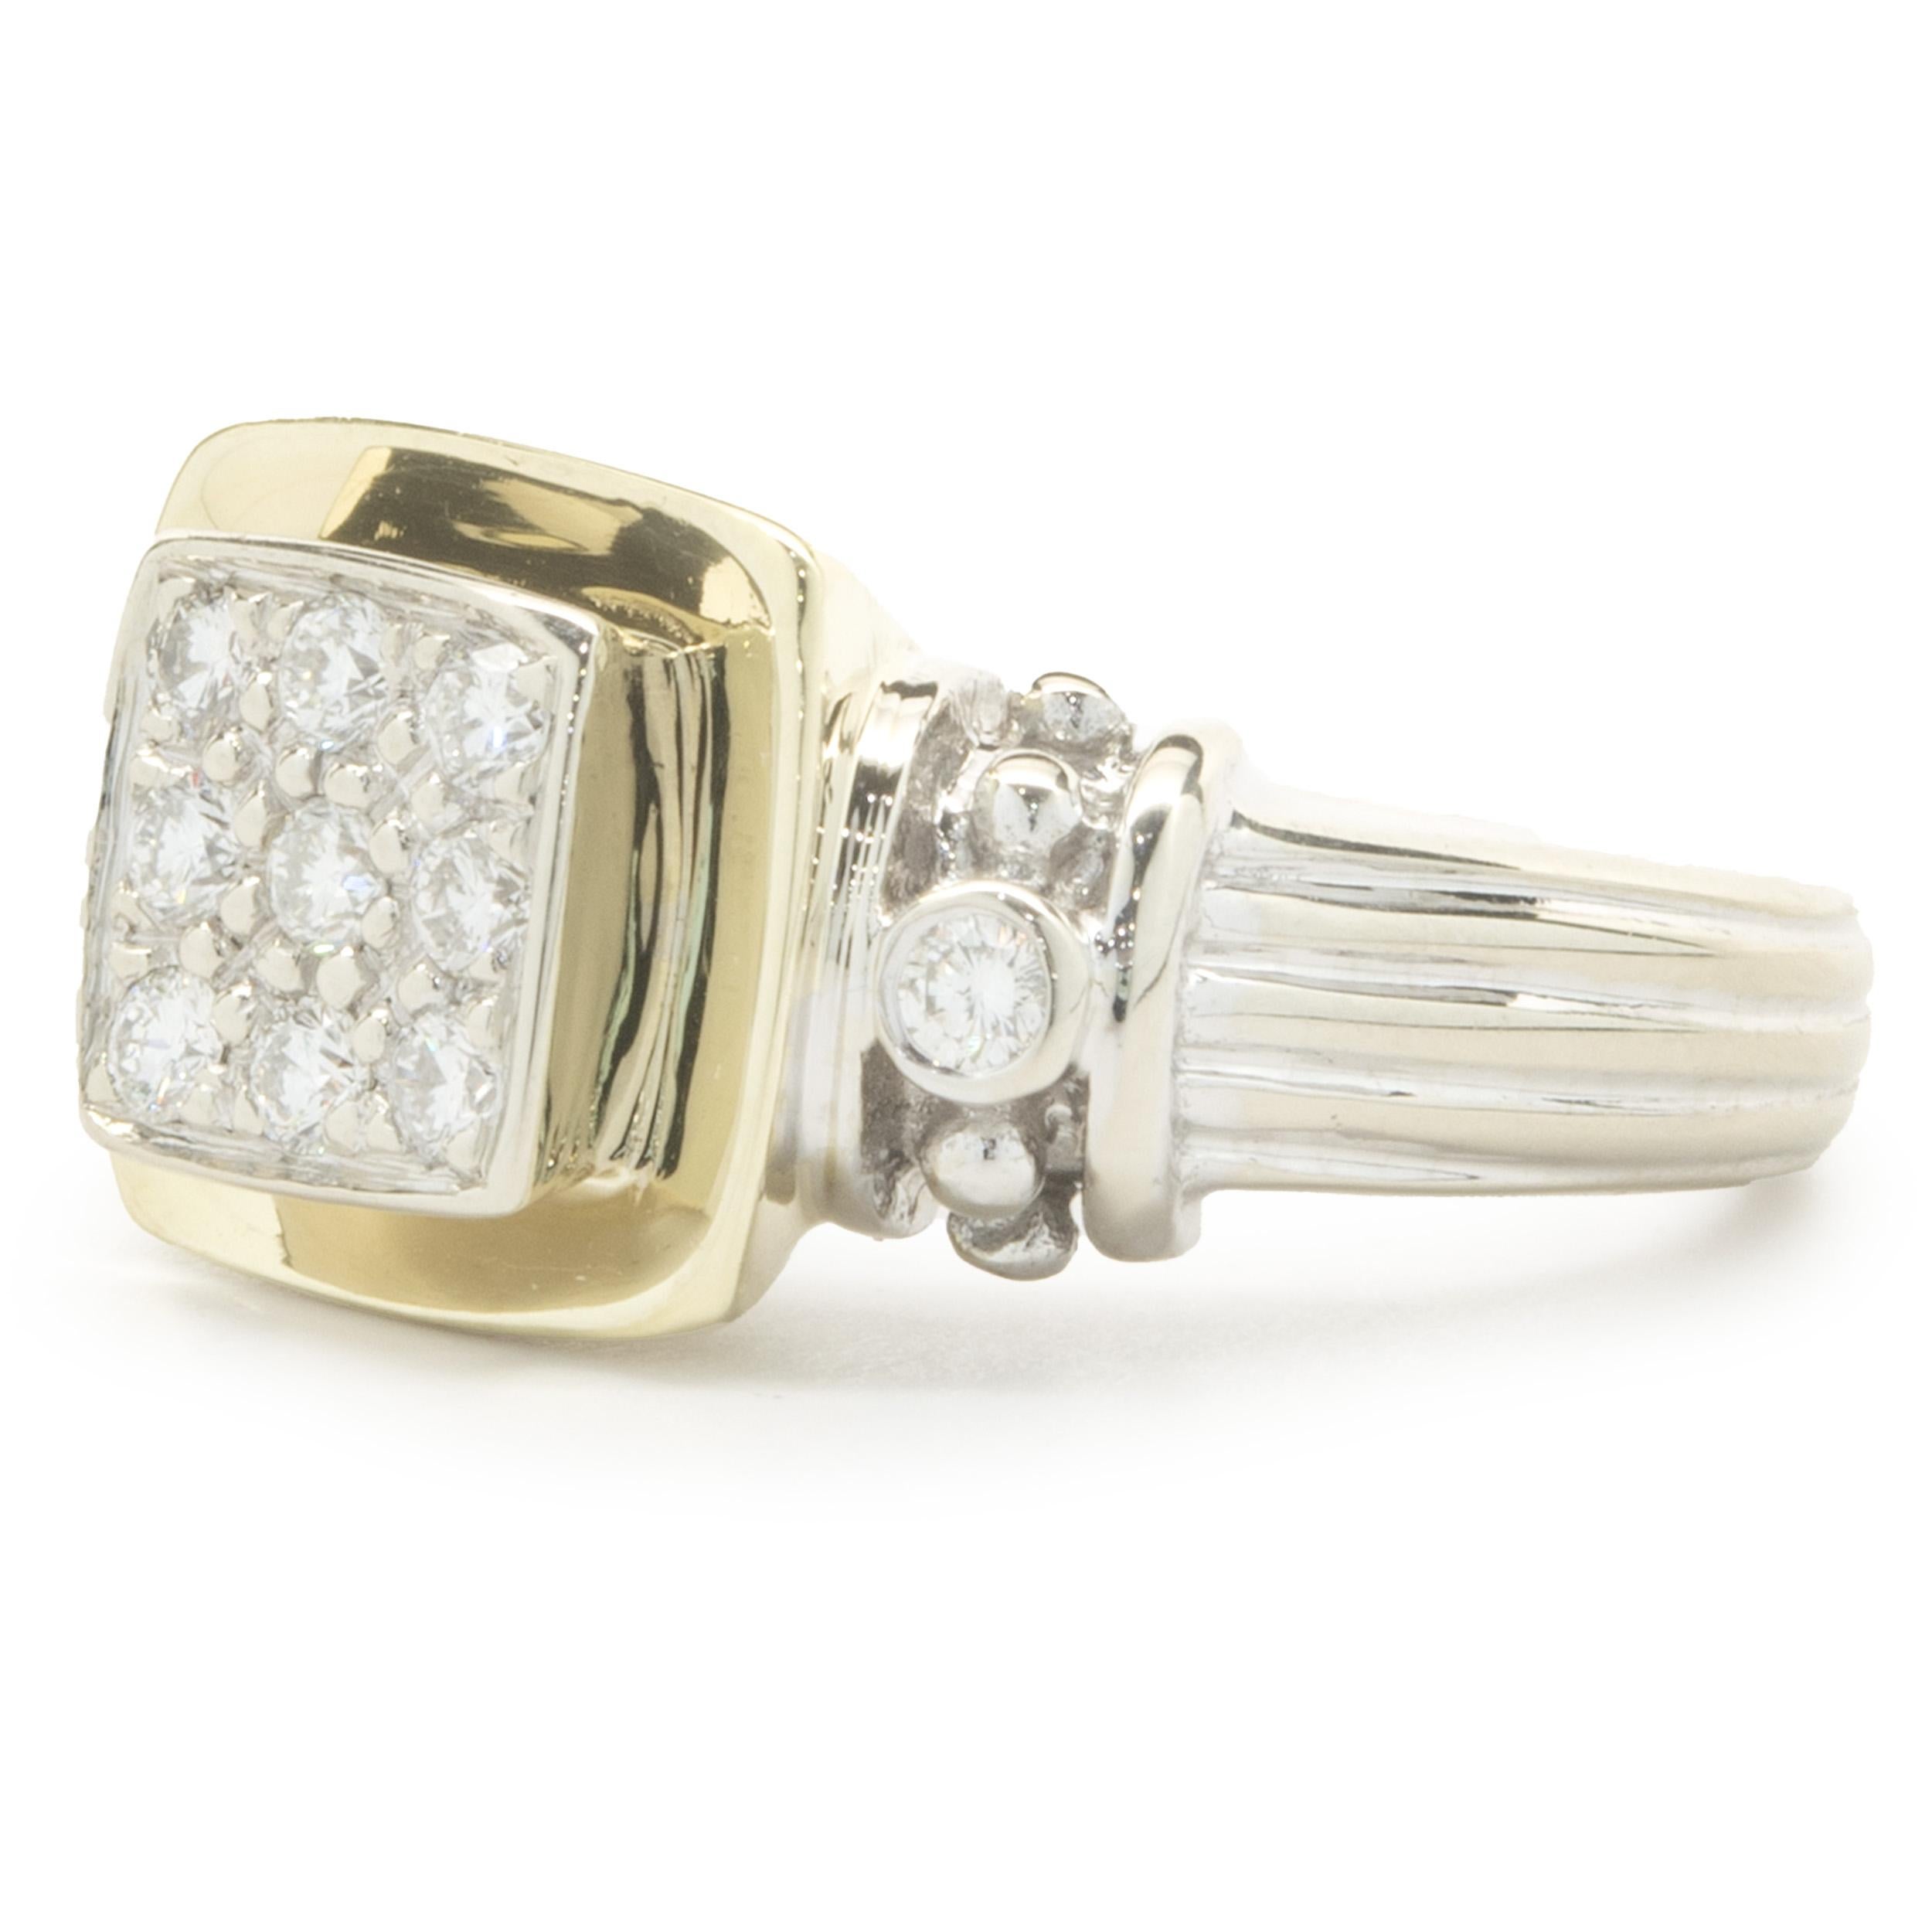 14 Karat White and Yellow Gold Pave Diamond Ring In Excellent Condition For Sale In Scottsdale, AZ